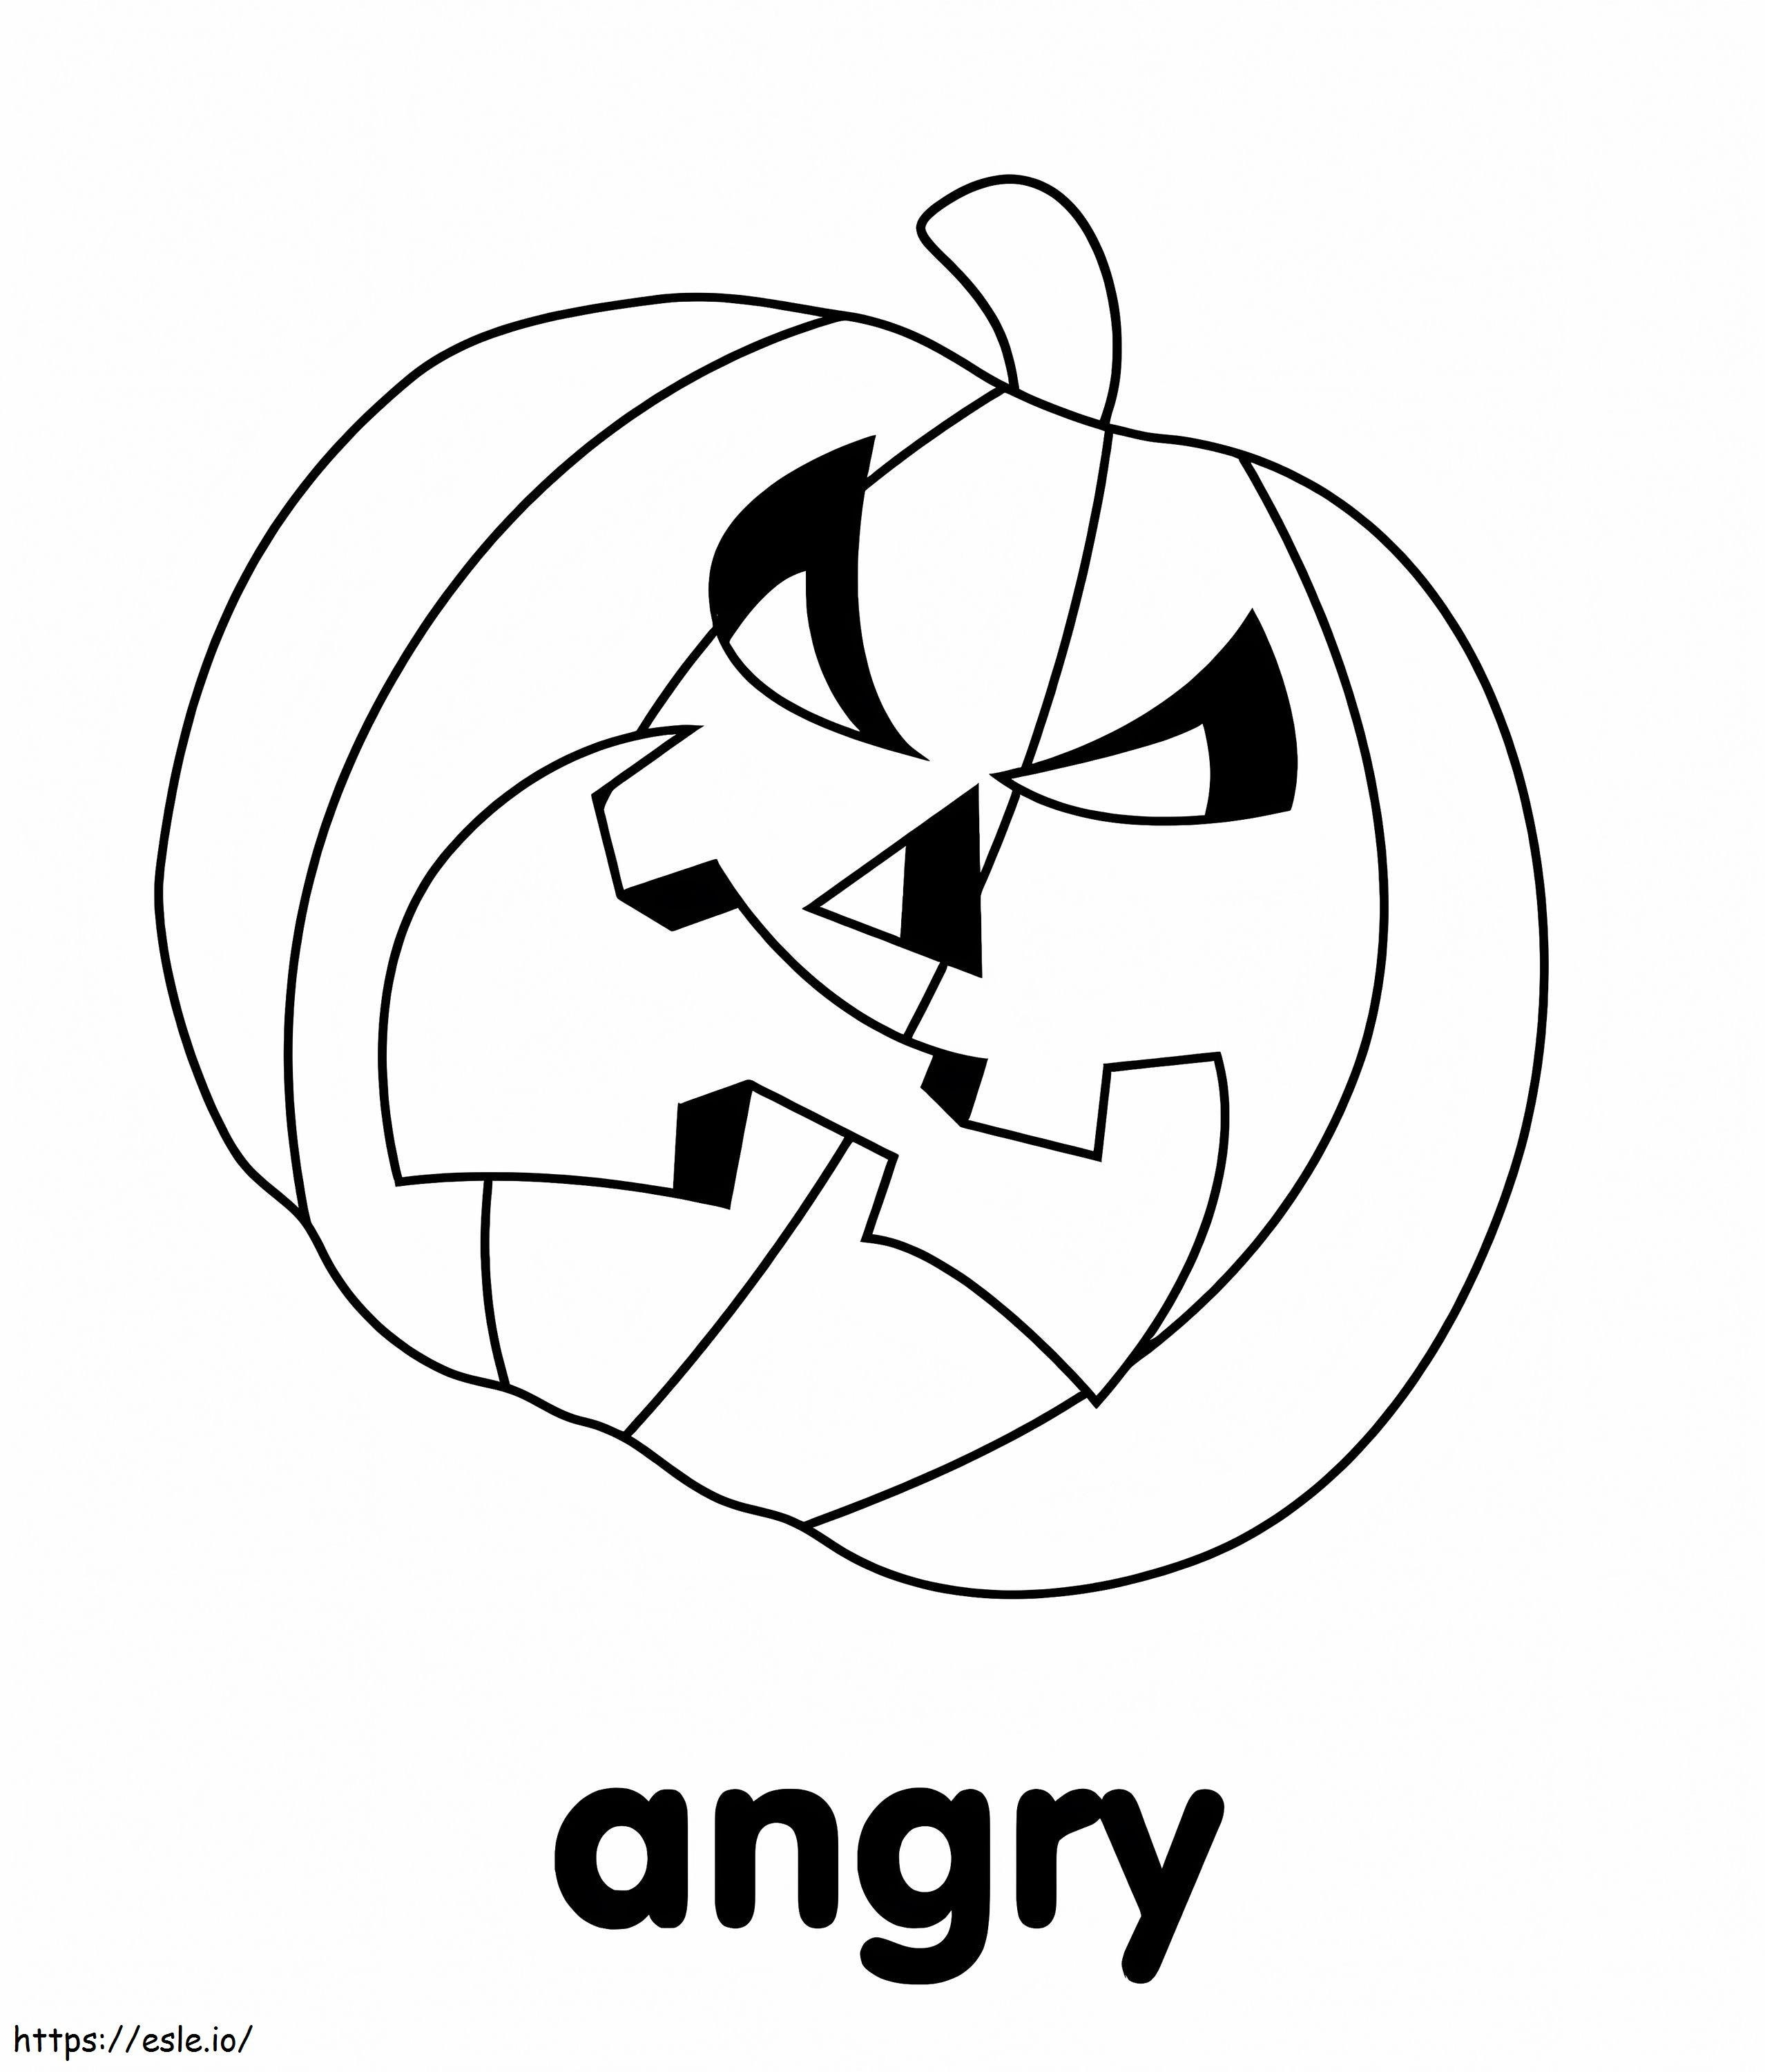 Angry Pumpkin coloring page